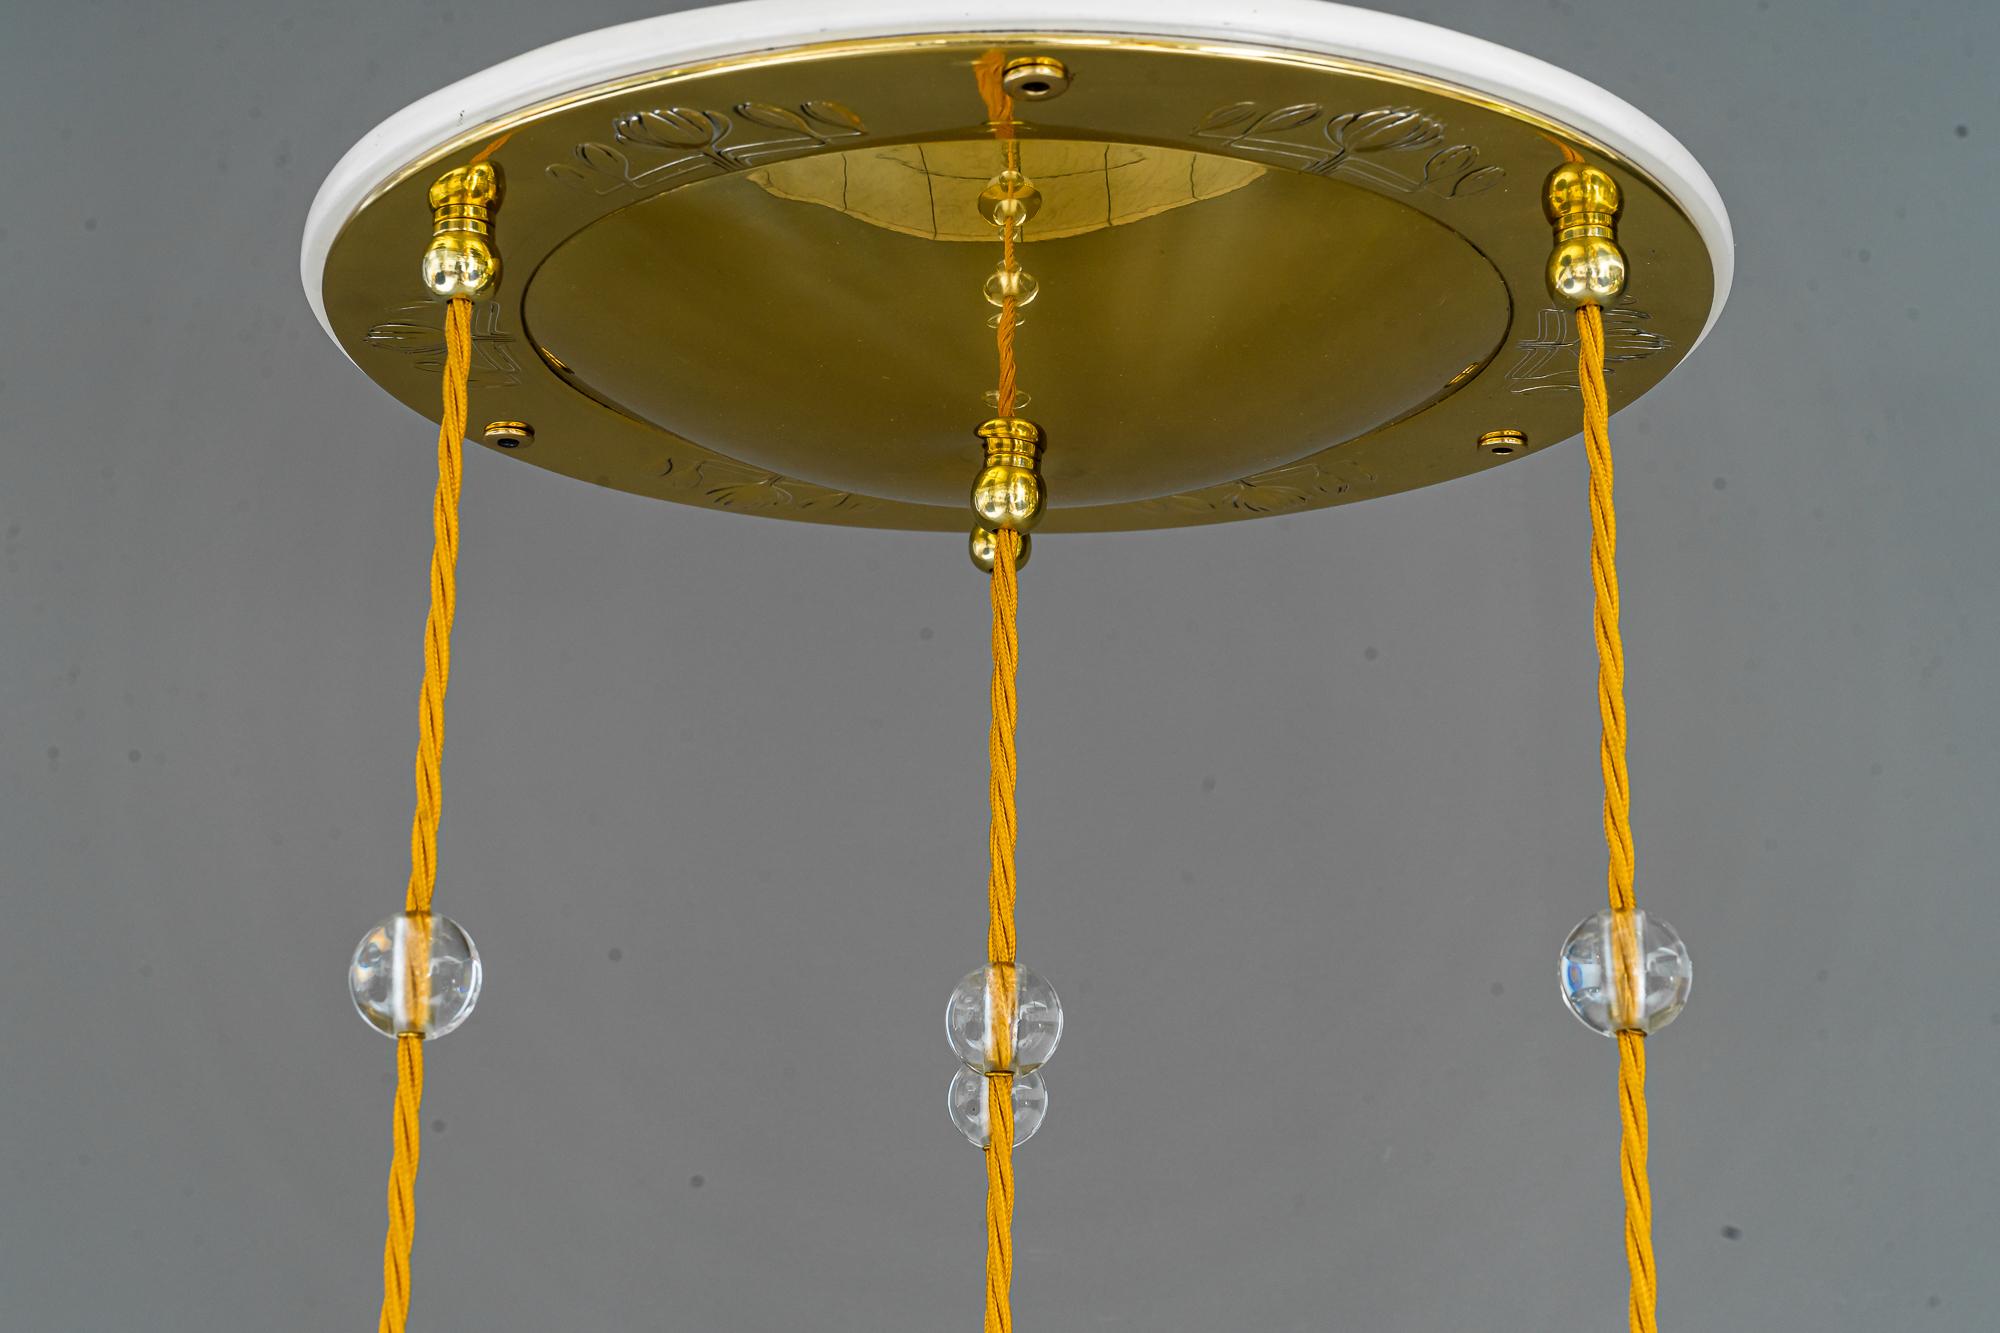 Jugendstil chandelier vienna around 1910.
Brass polished and stover enameled.
We can adjust the height of the chandelier to your room height.
The wires are replaced (new).
The glass balls on the wire are replaced (new).
 